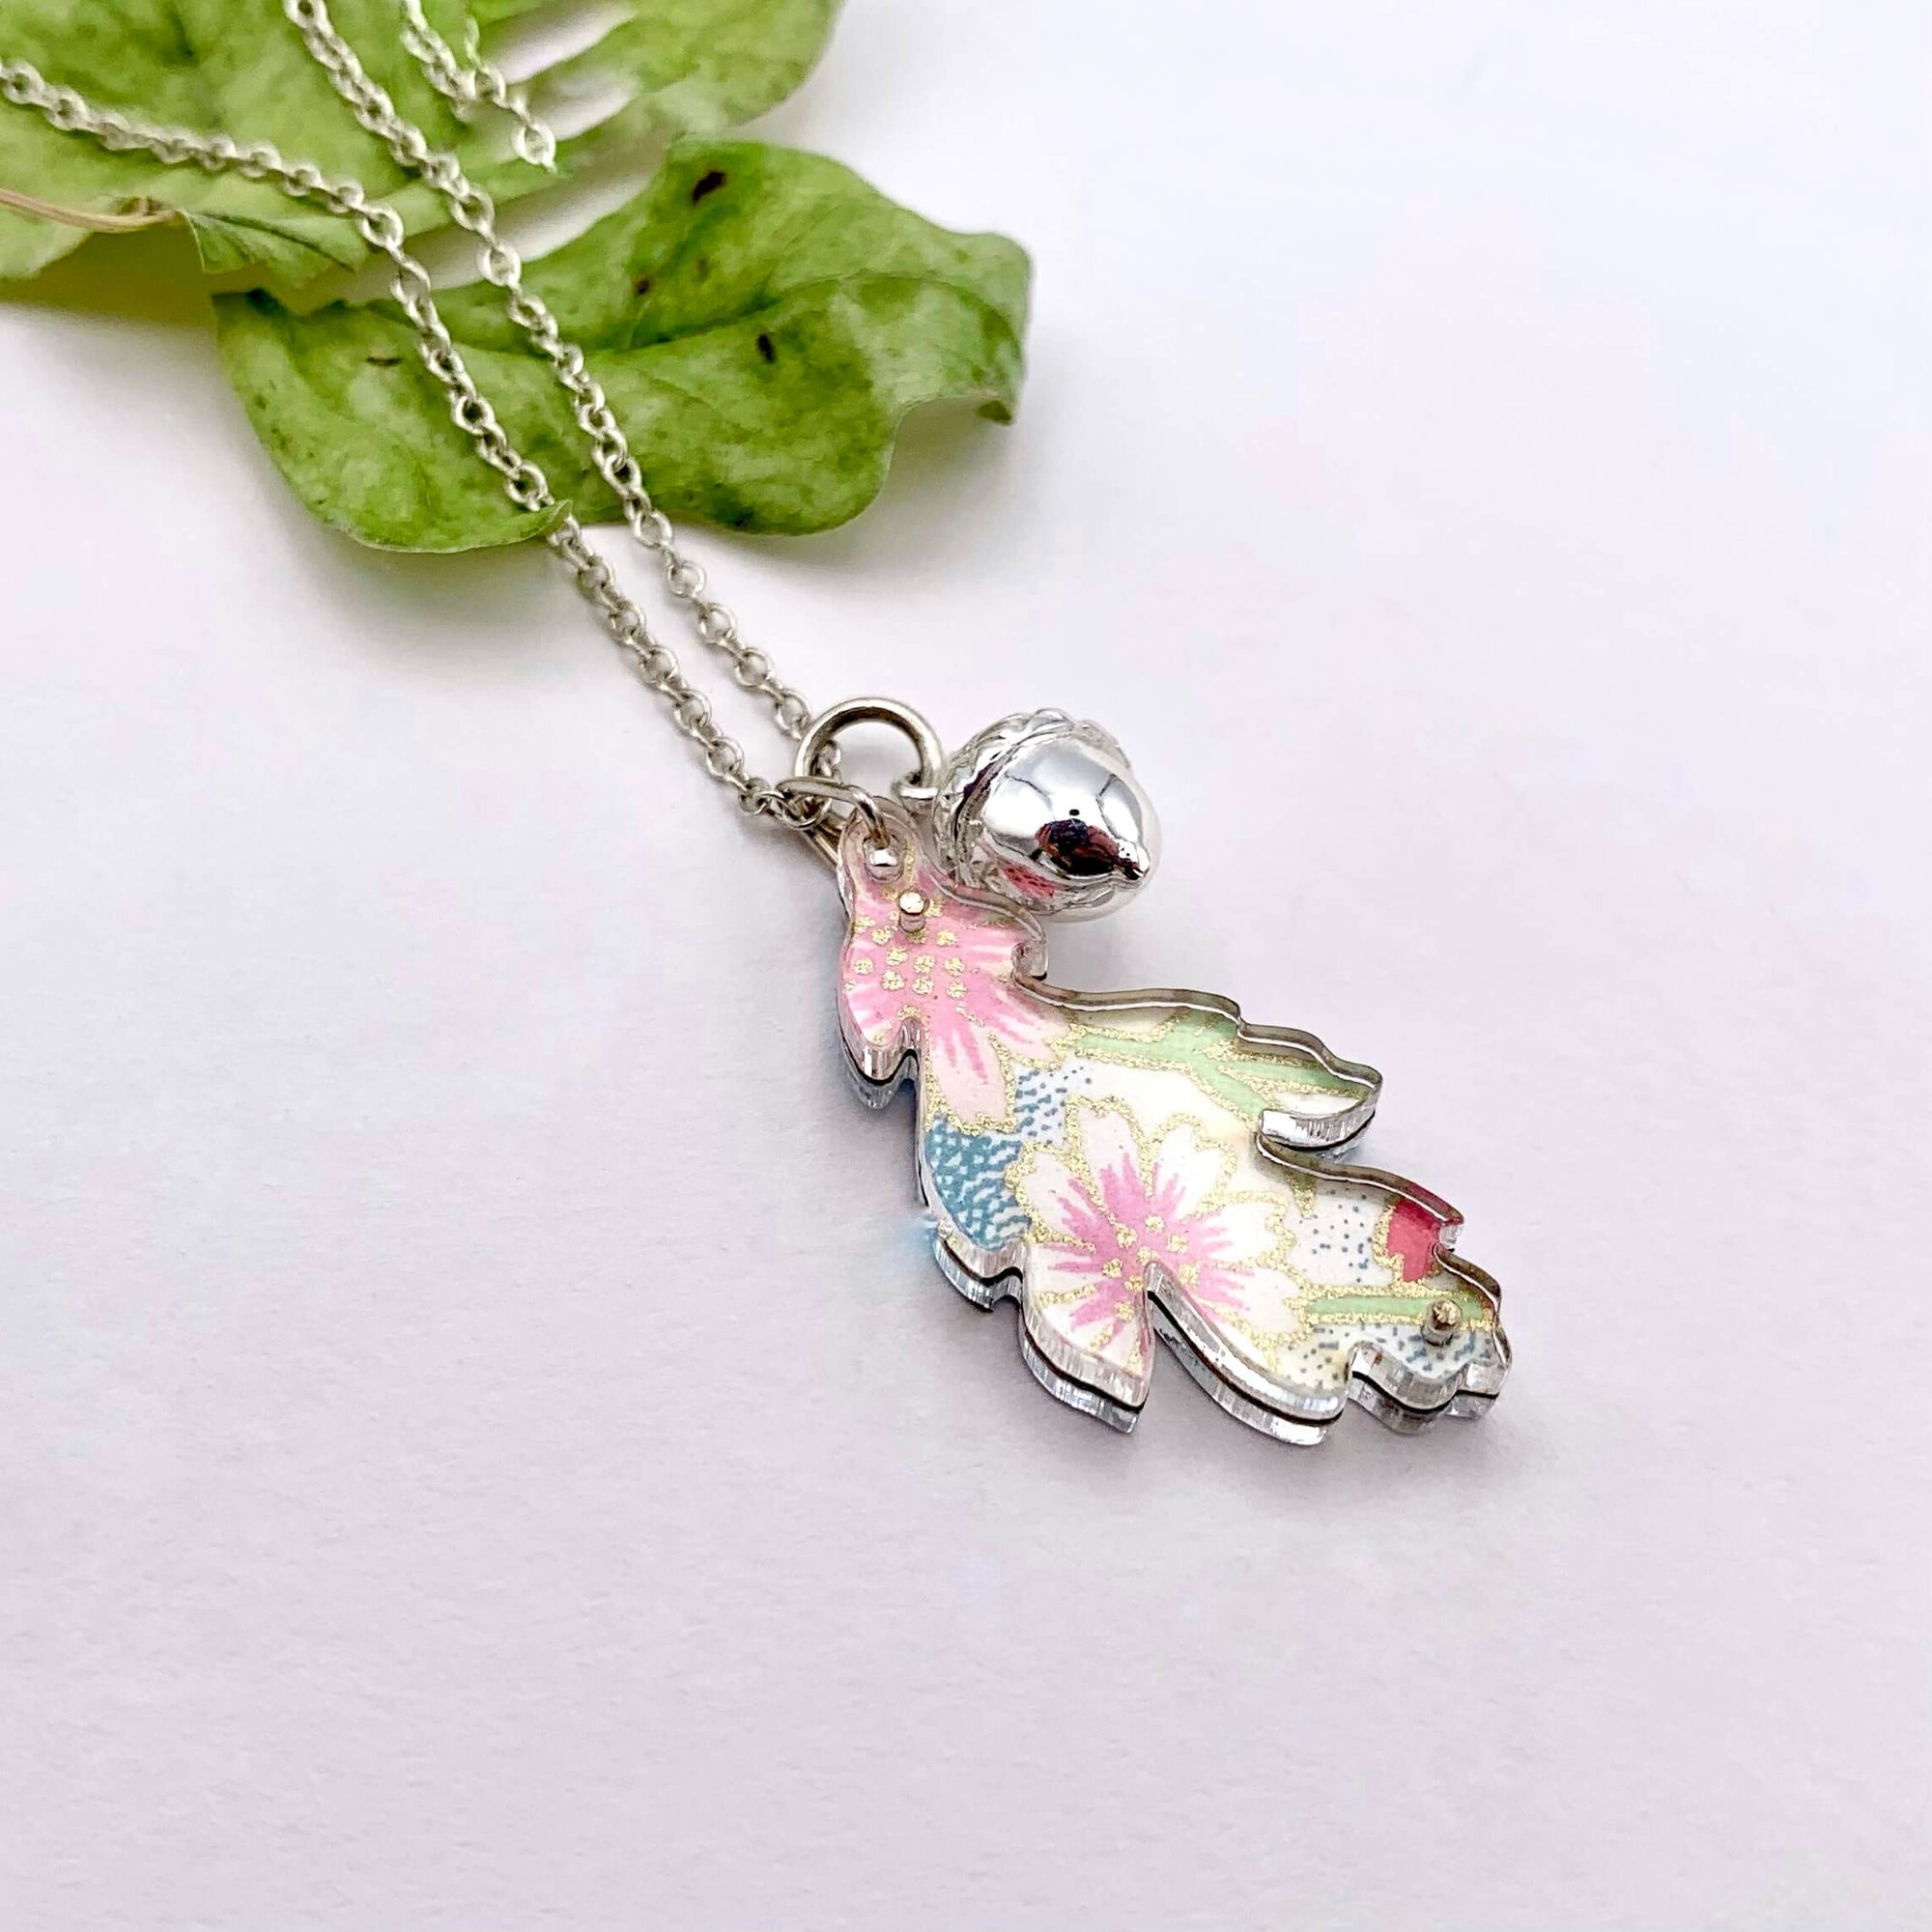 Handmade silver chain necklace, featuring a solid silver acorn and colourful reversible leaf. Leaf is made from pink and blue floral hand-painted paper, between two layers of perspex.